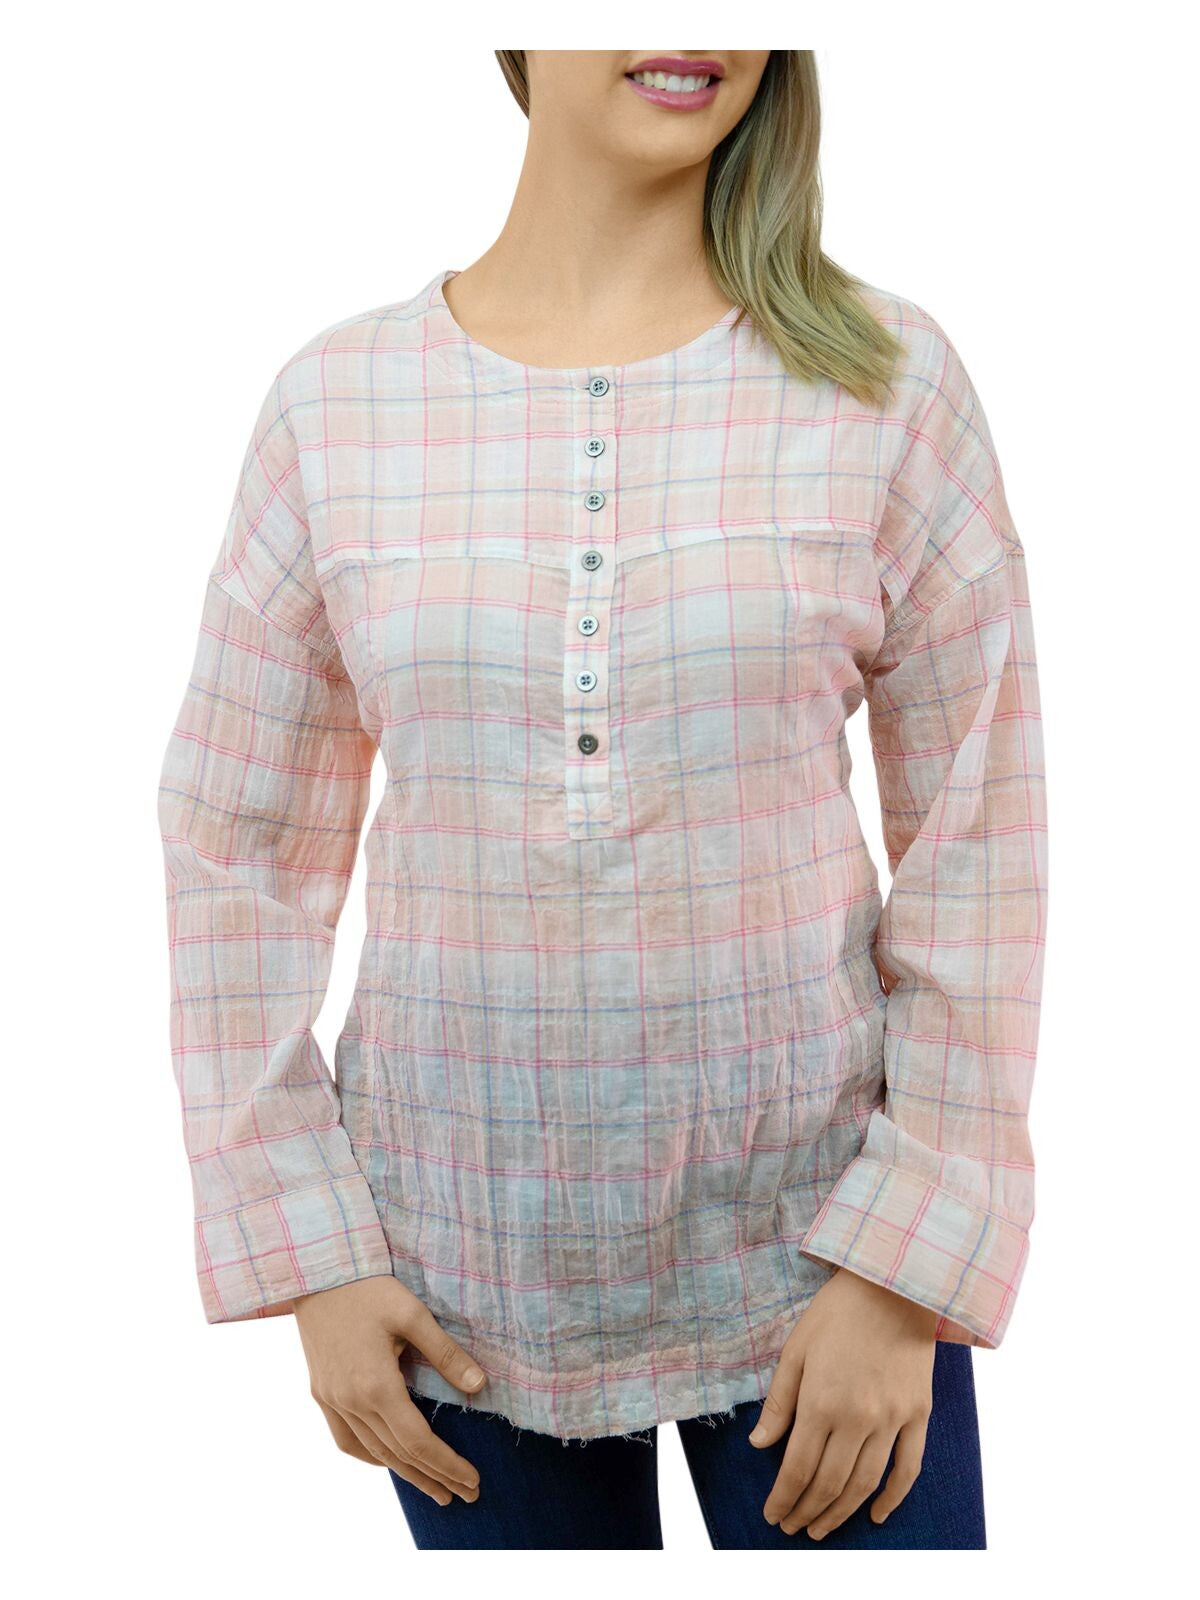 BEACHLUNCHLOUNGE COLLECTION Womens Pink Frayed Half Button Front Curved Hem Plaid Long Sleeve Round Neck Top XS